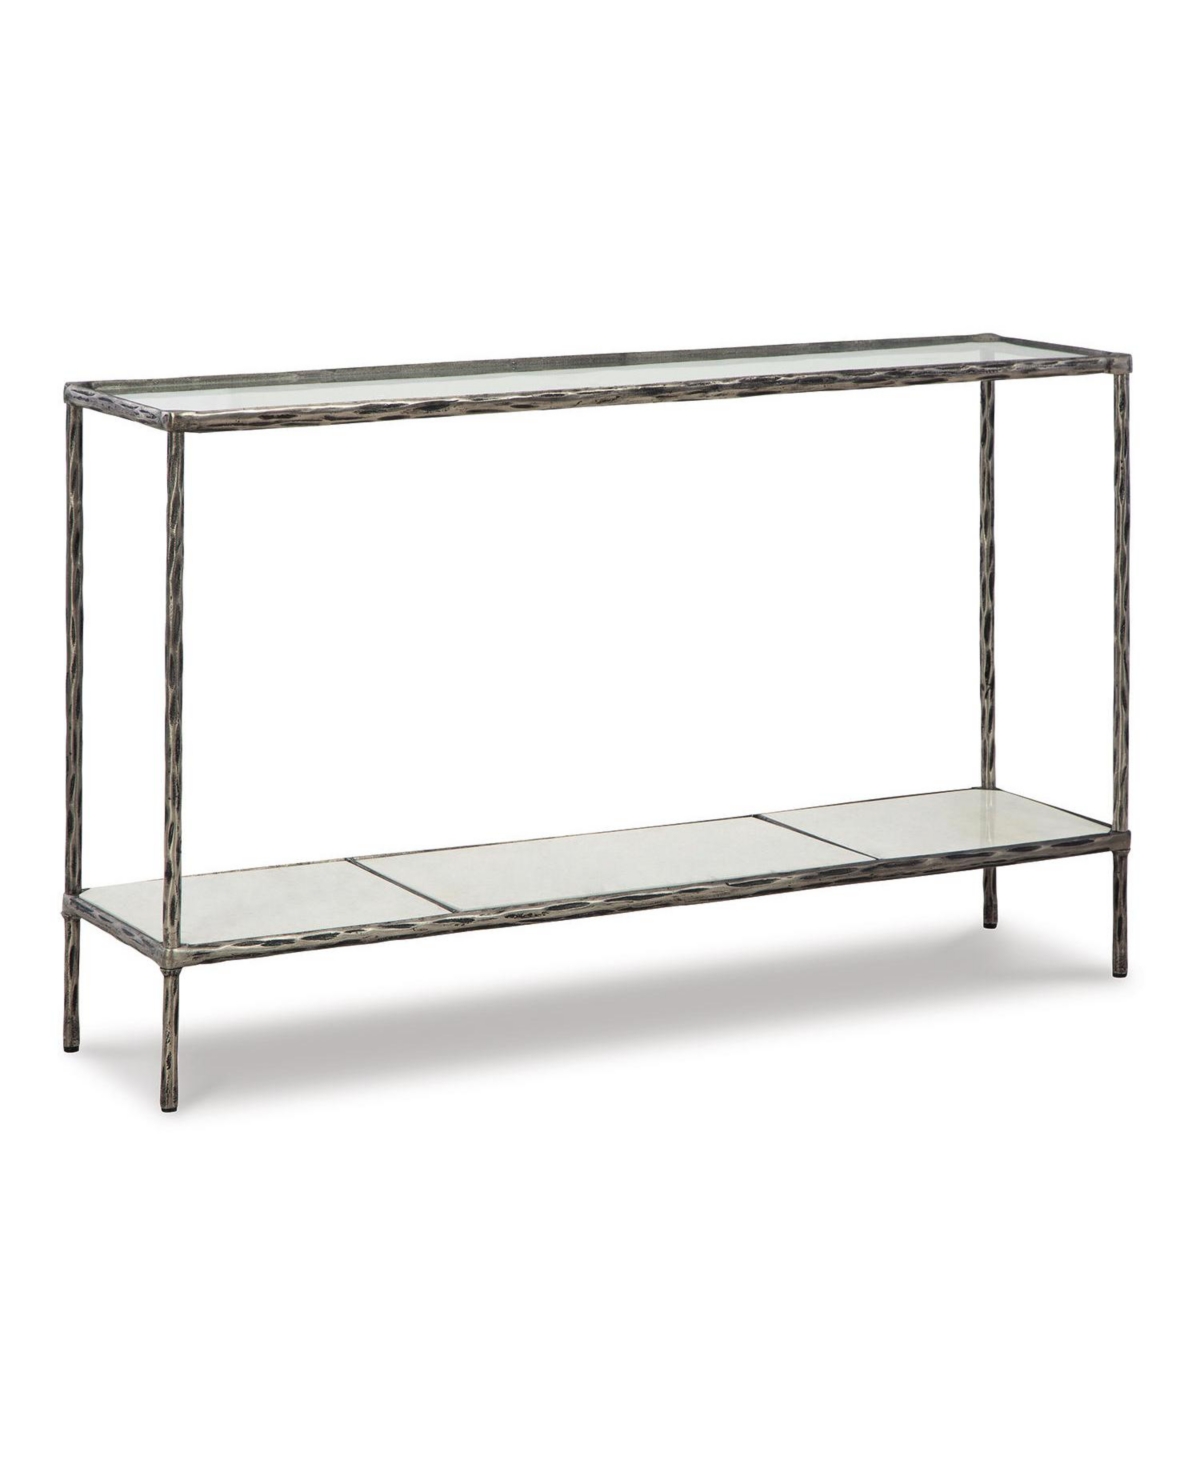 Signature Design By Ashley Ryandale Console Sofa Table In Antique Pewter Finish